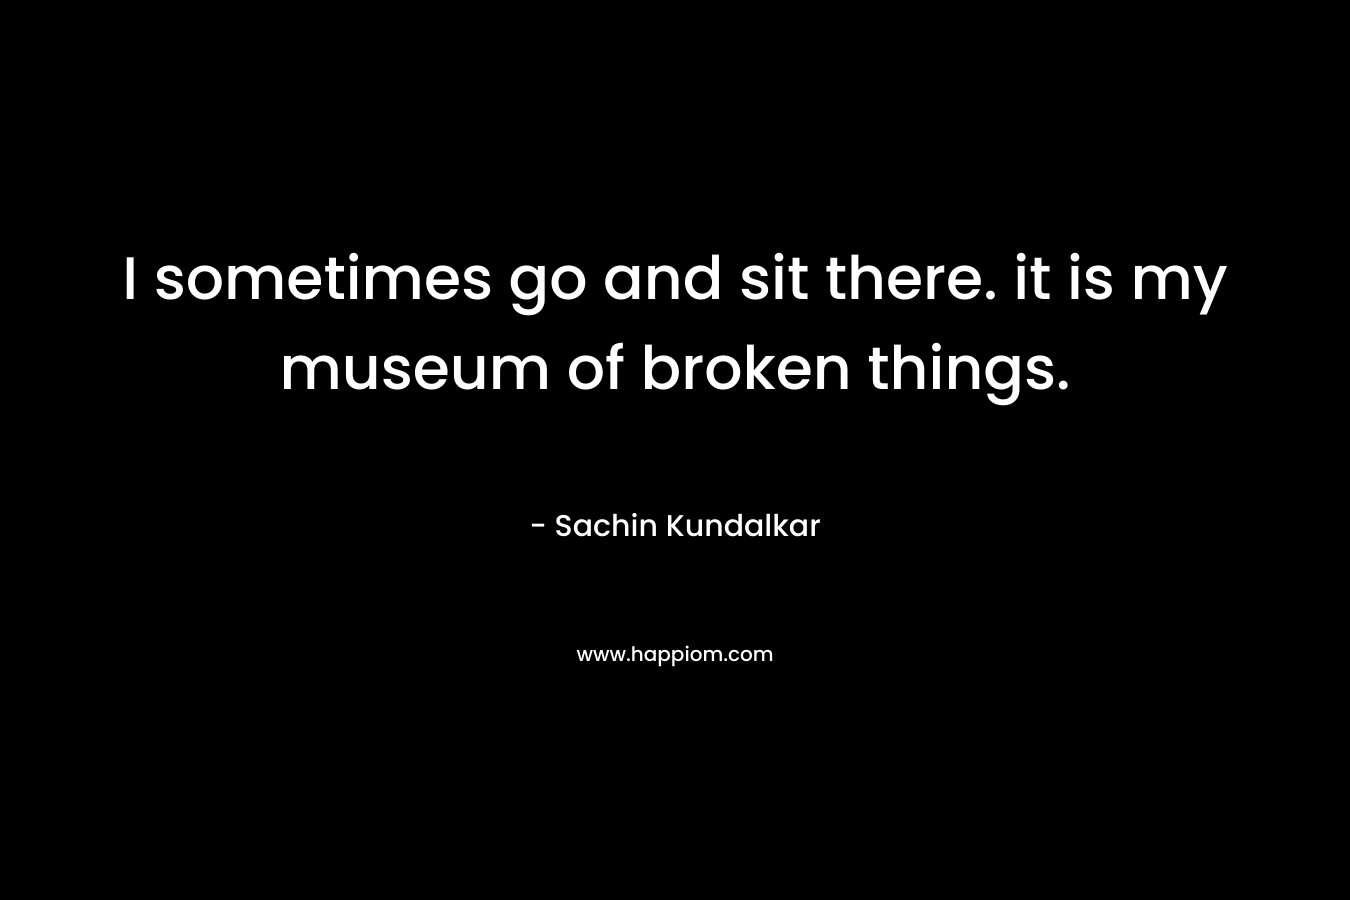 I sometimes go and sit there. it is my museum of broken things. – Sachin Kundalkar